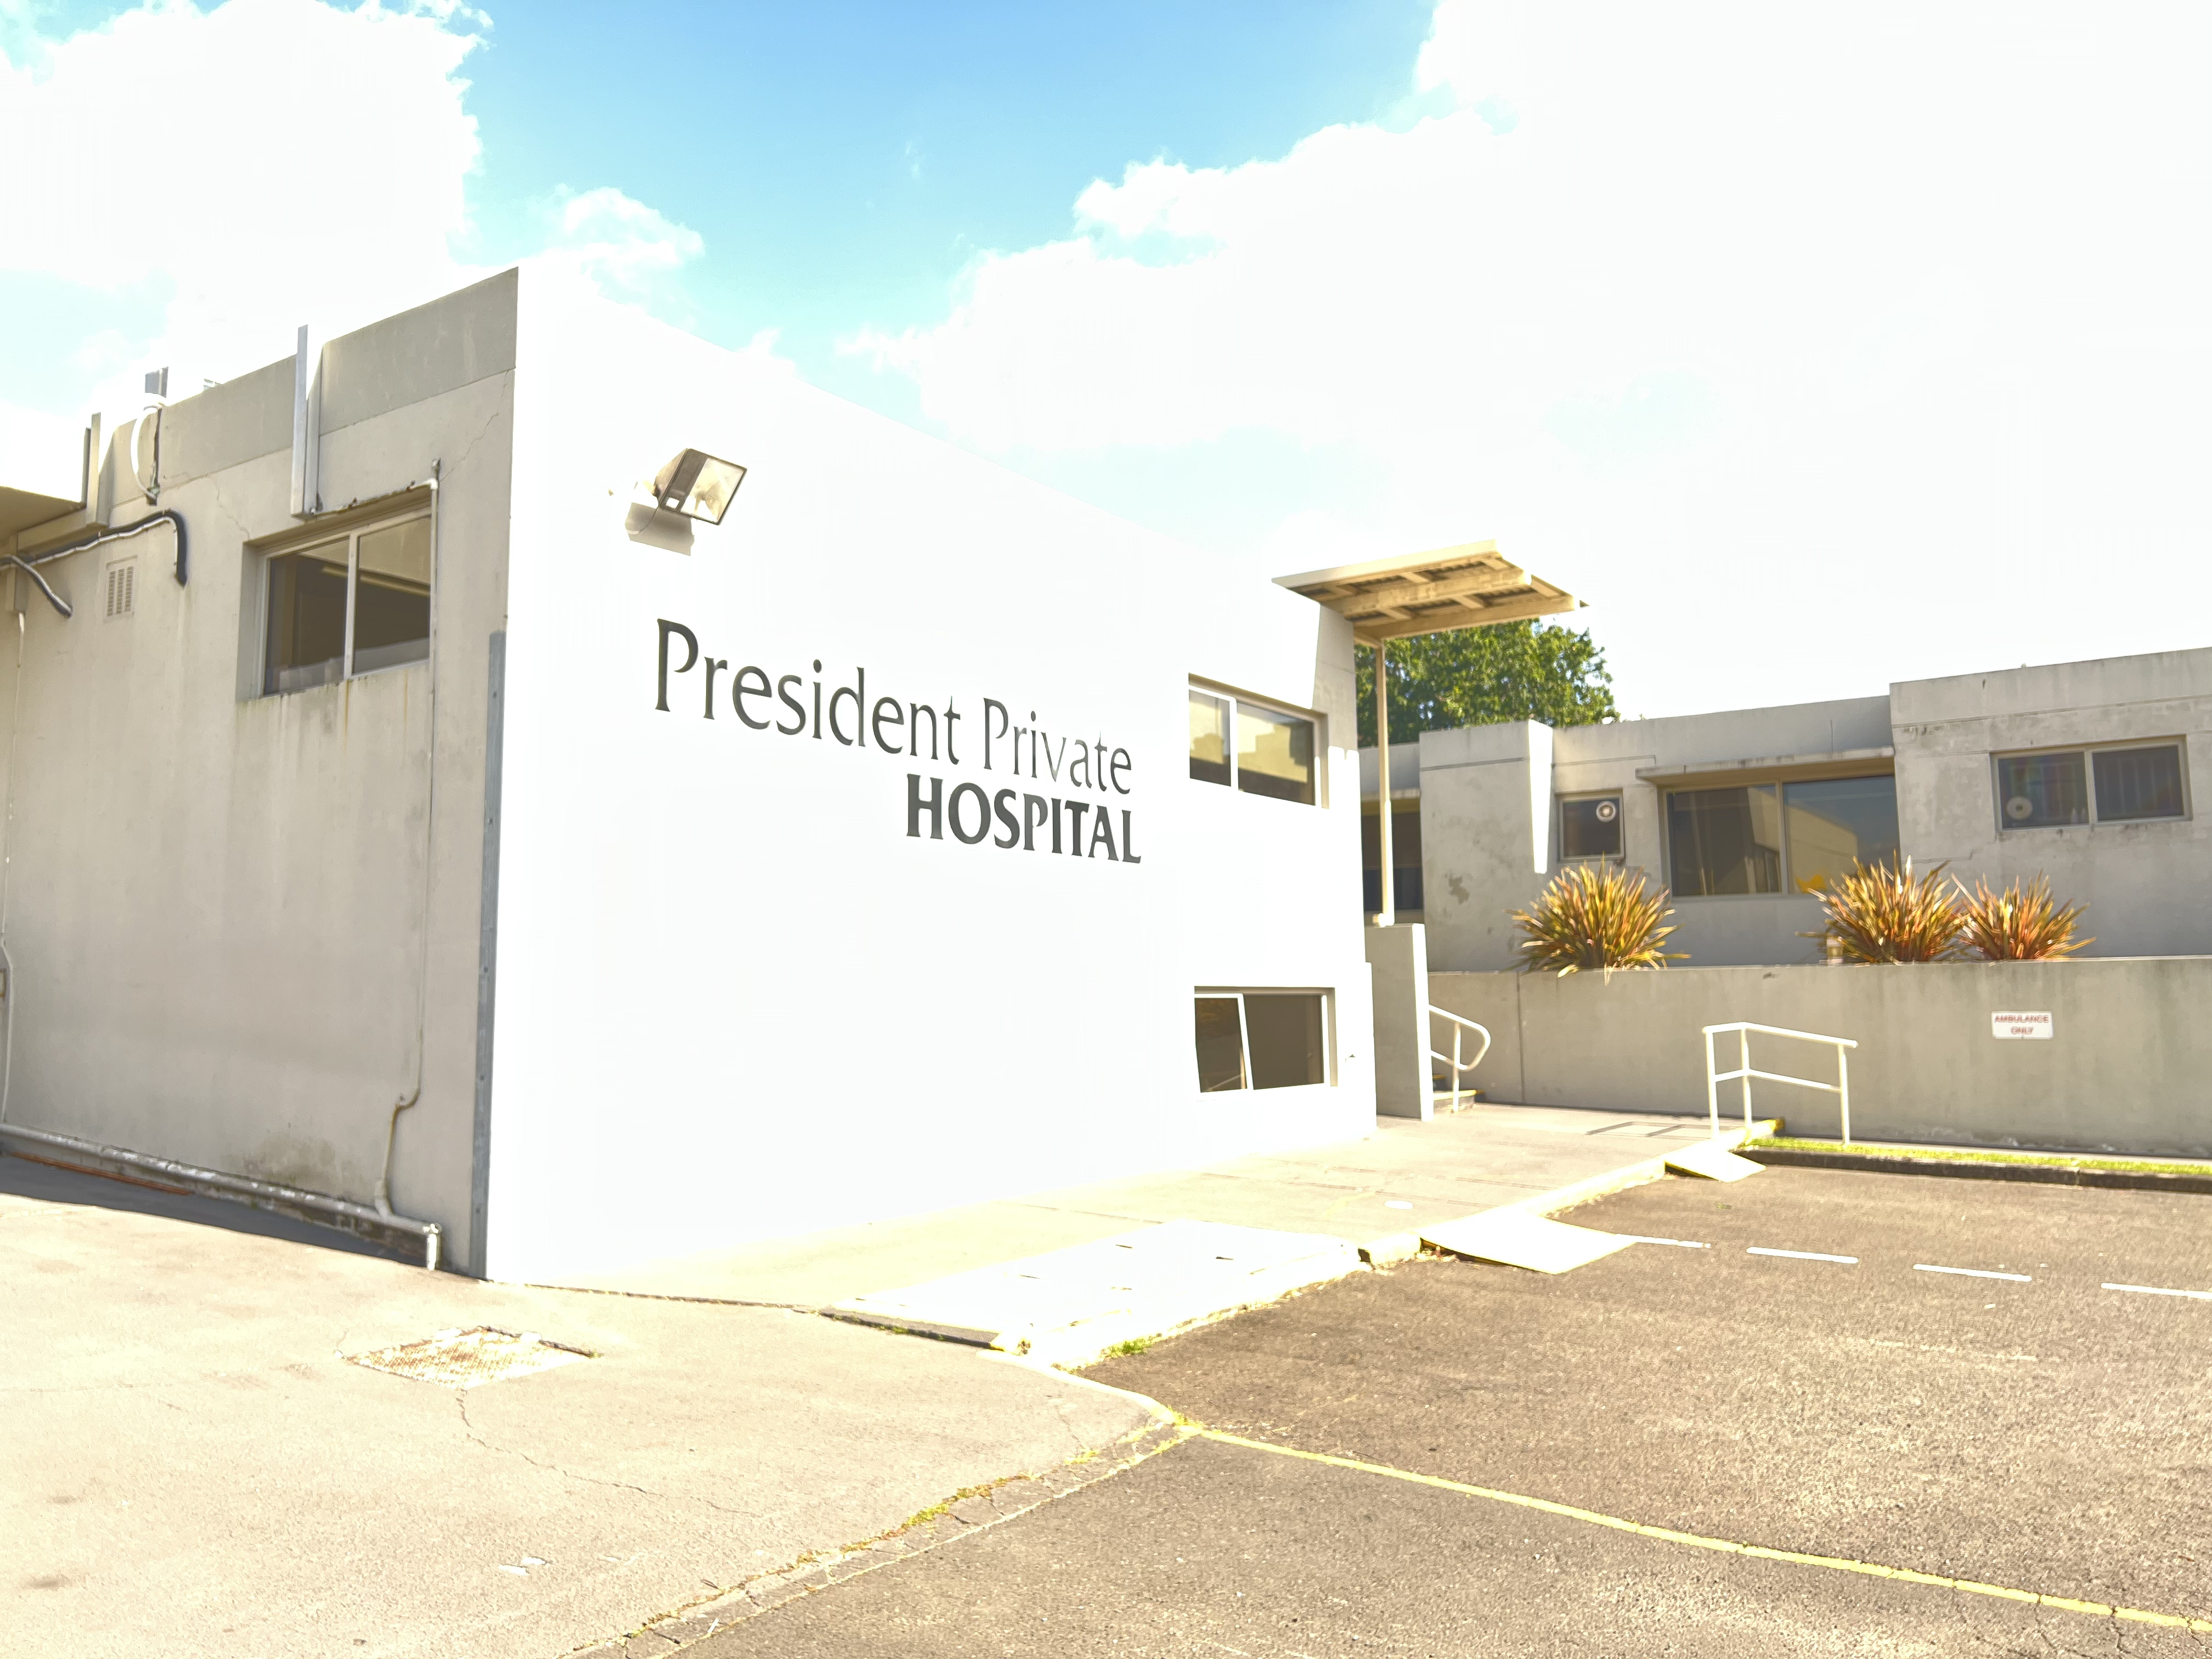 Redevelopment of President Private Hospital Refused Due to Historic Heritage Impacts